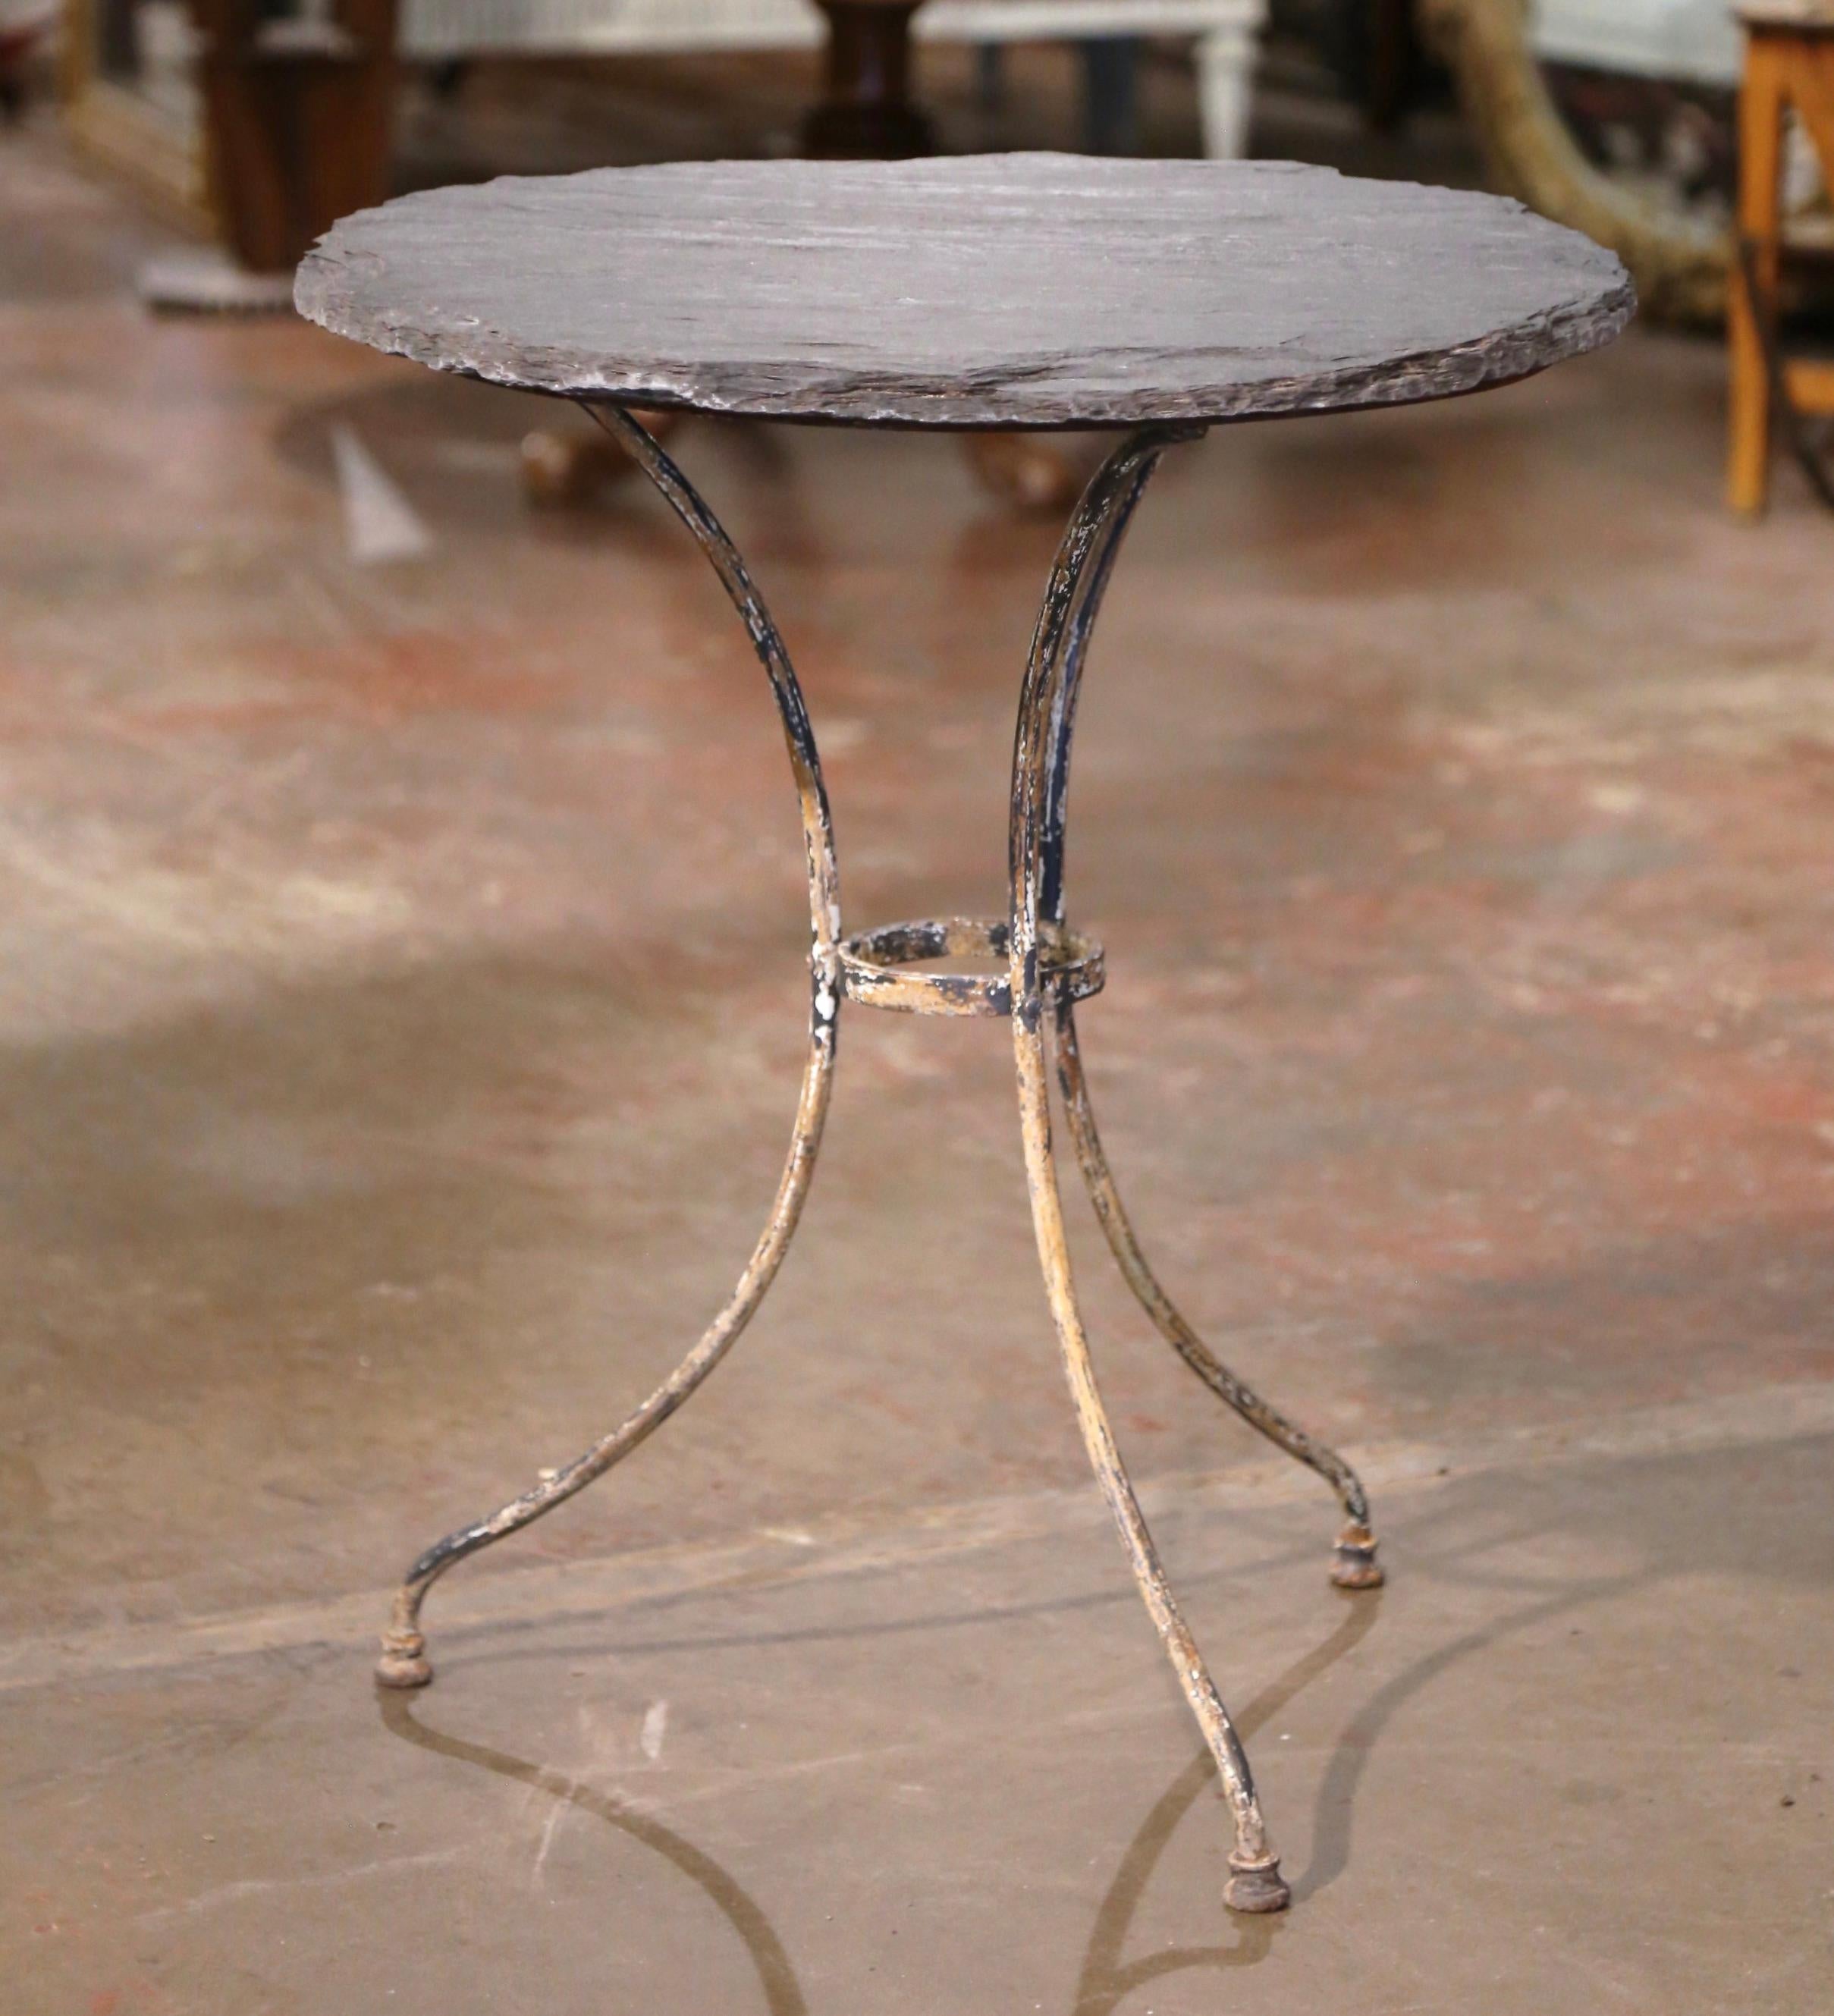 Decorate a patio or covered porch with this elegant antique bistrot table. Crafted in France circa 1870, the cast iron table sits on three scroll legs connected with a round center stretcher. The table surface is dressed with a natural finished gray